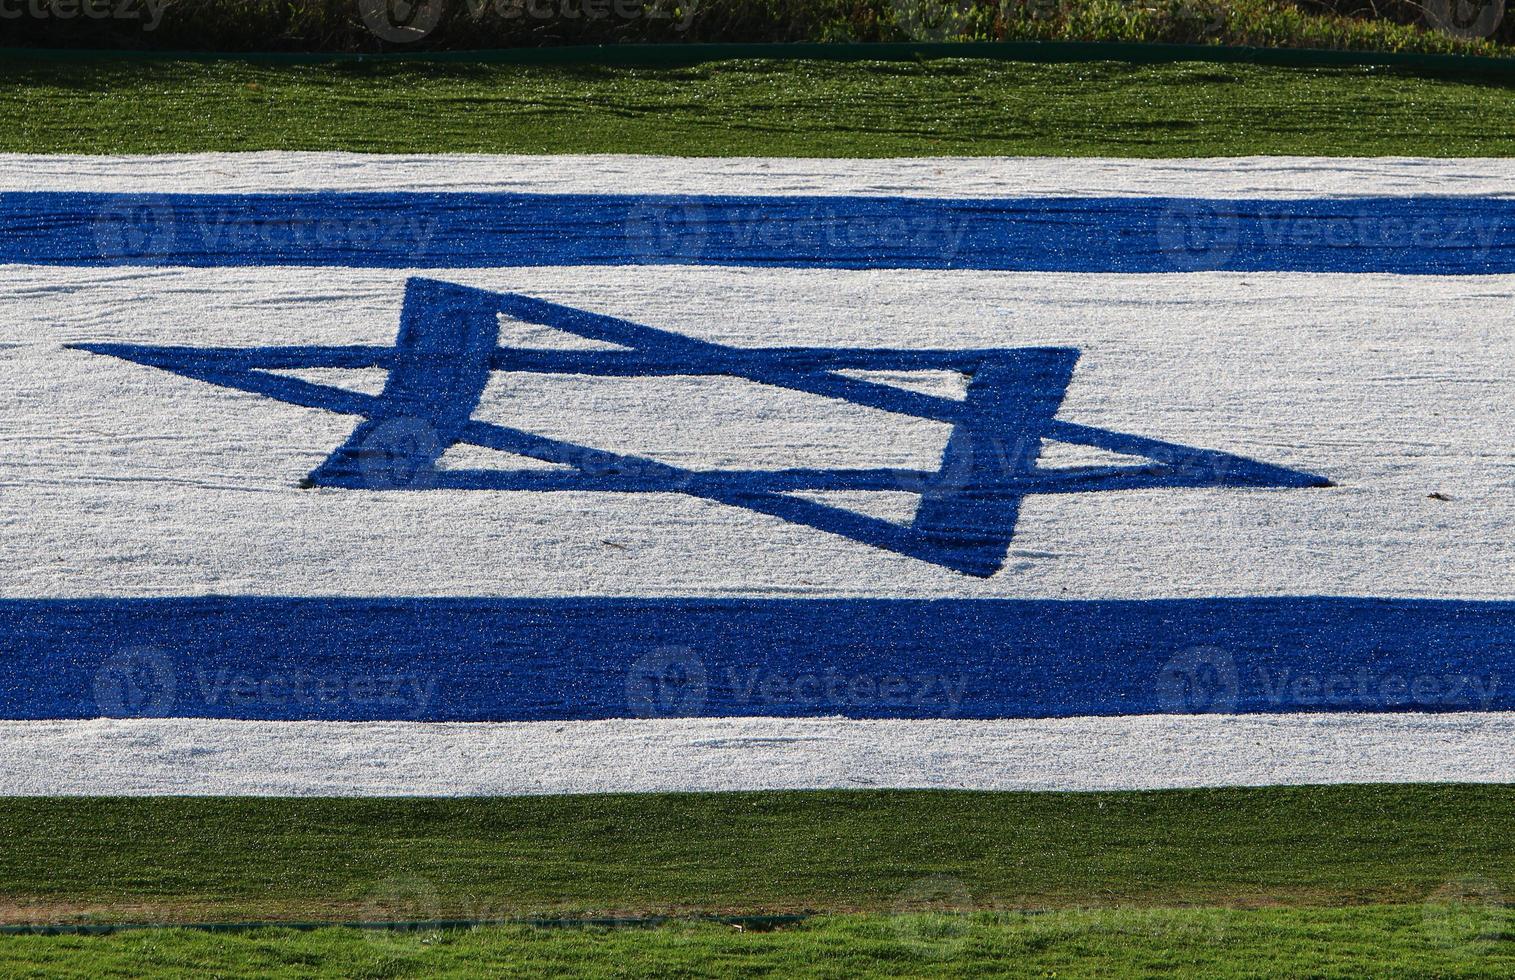 The blue and white Israeli flag with the Star of David. photo